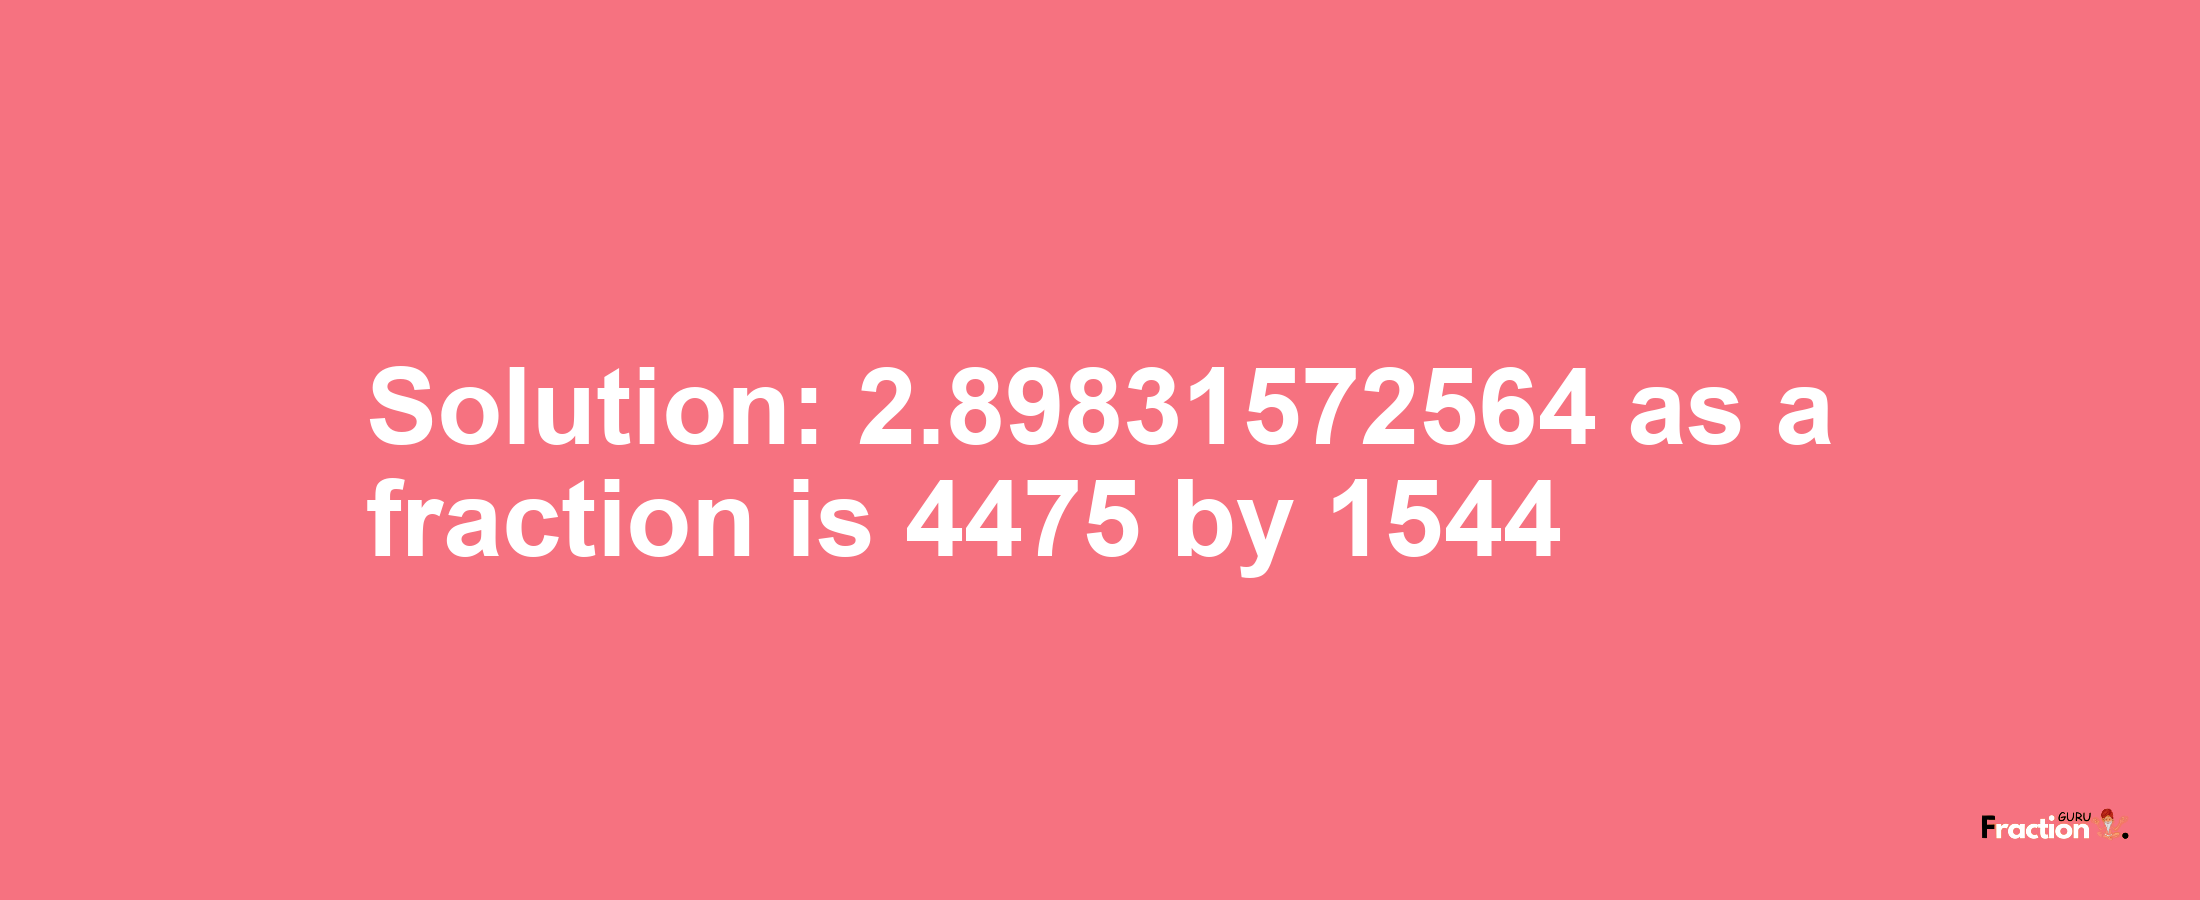 Solution:2.89831572564 as a fraction is 4475/1544